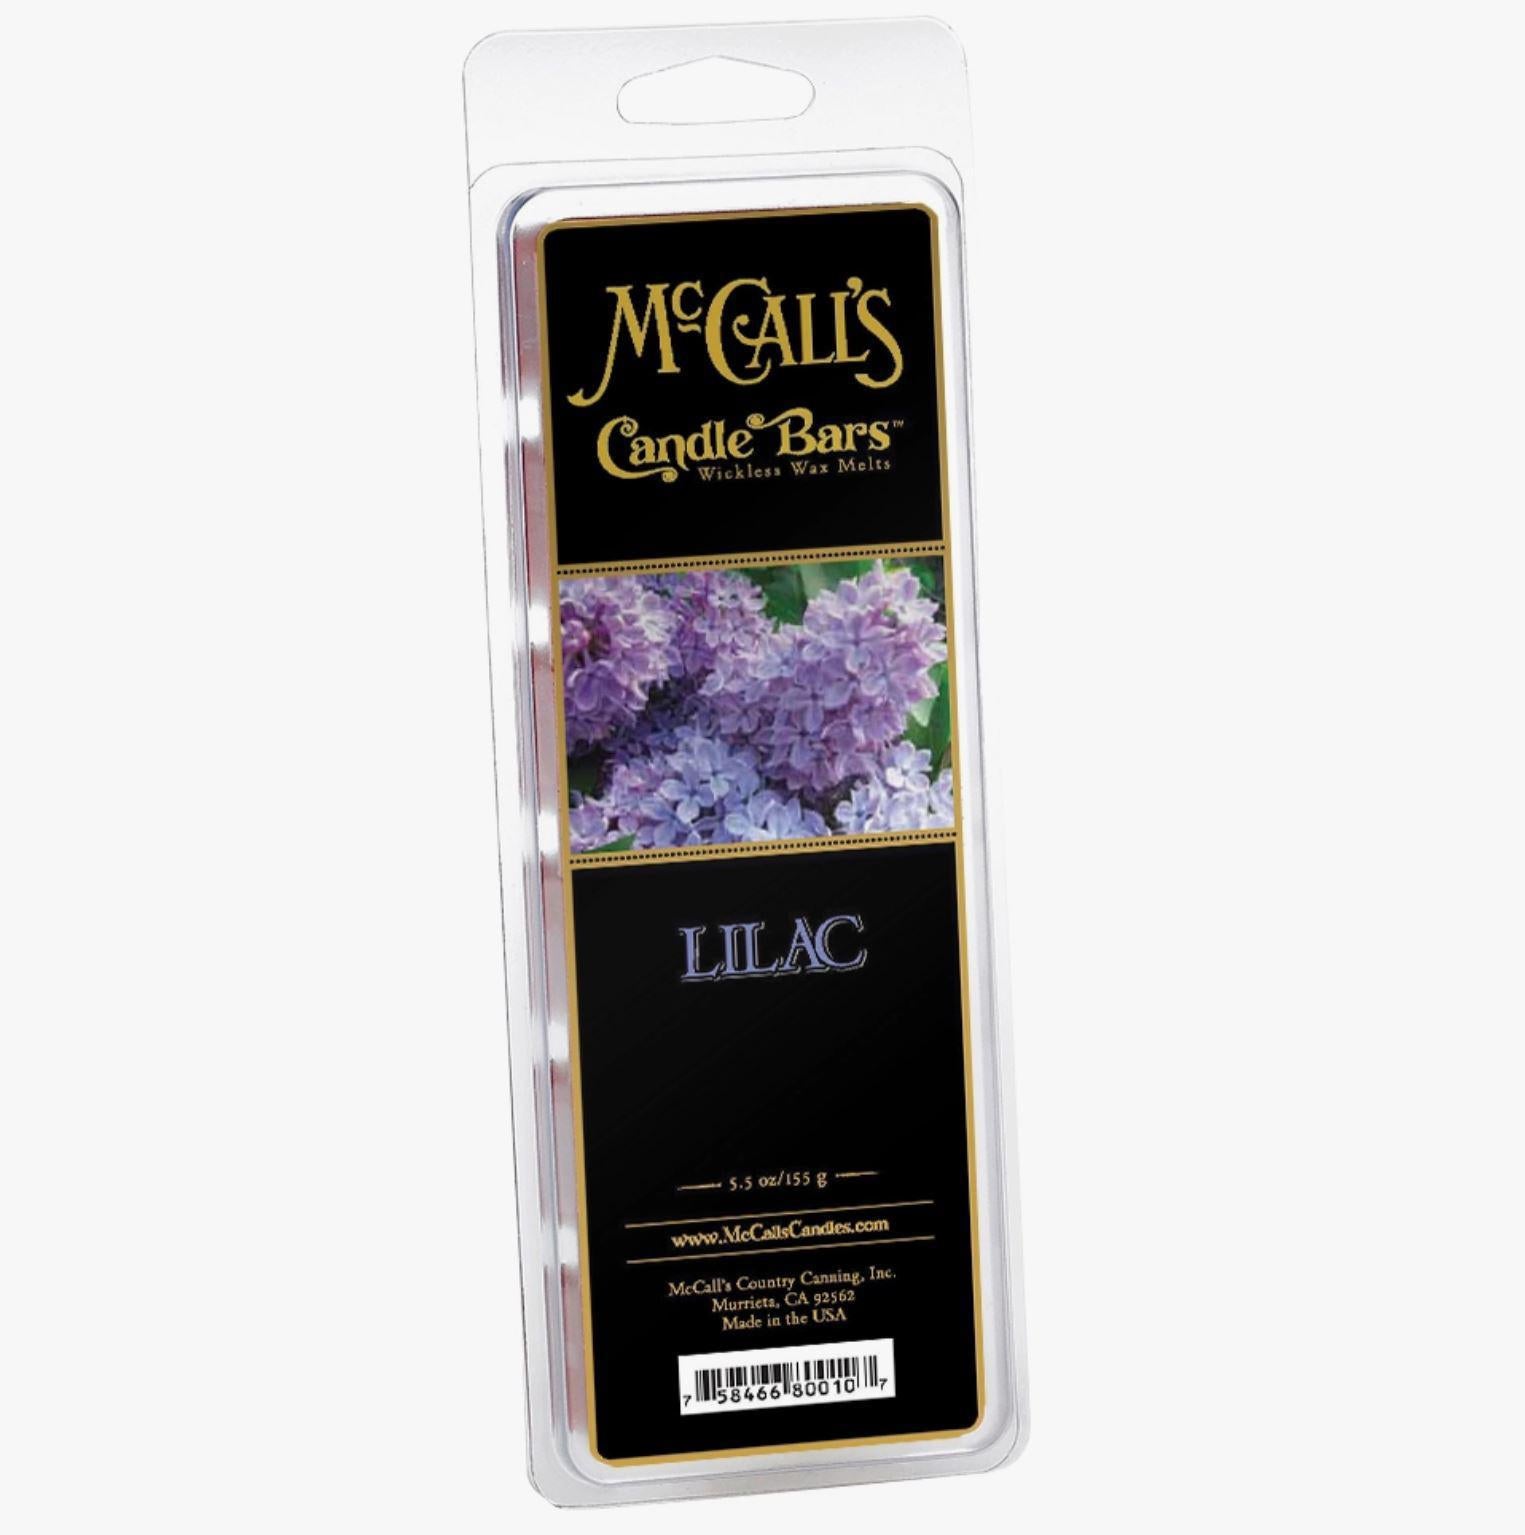 McCall's Candle Bars Wax Melts | Lilac